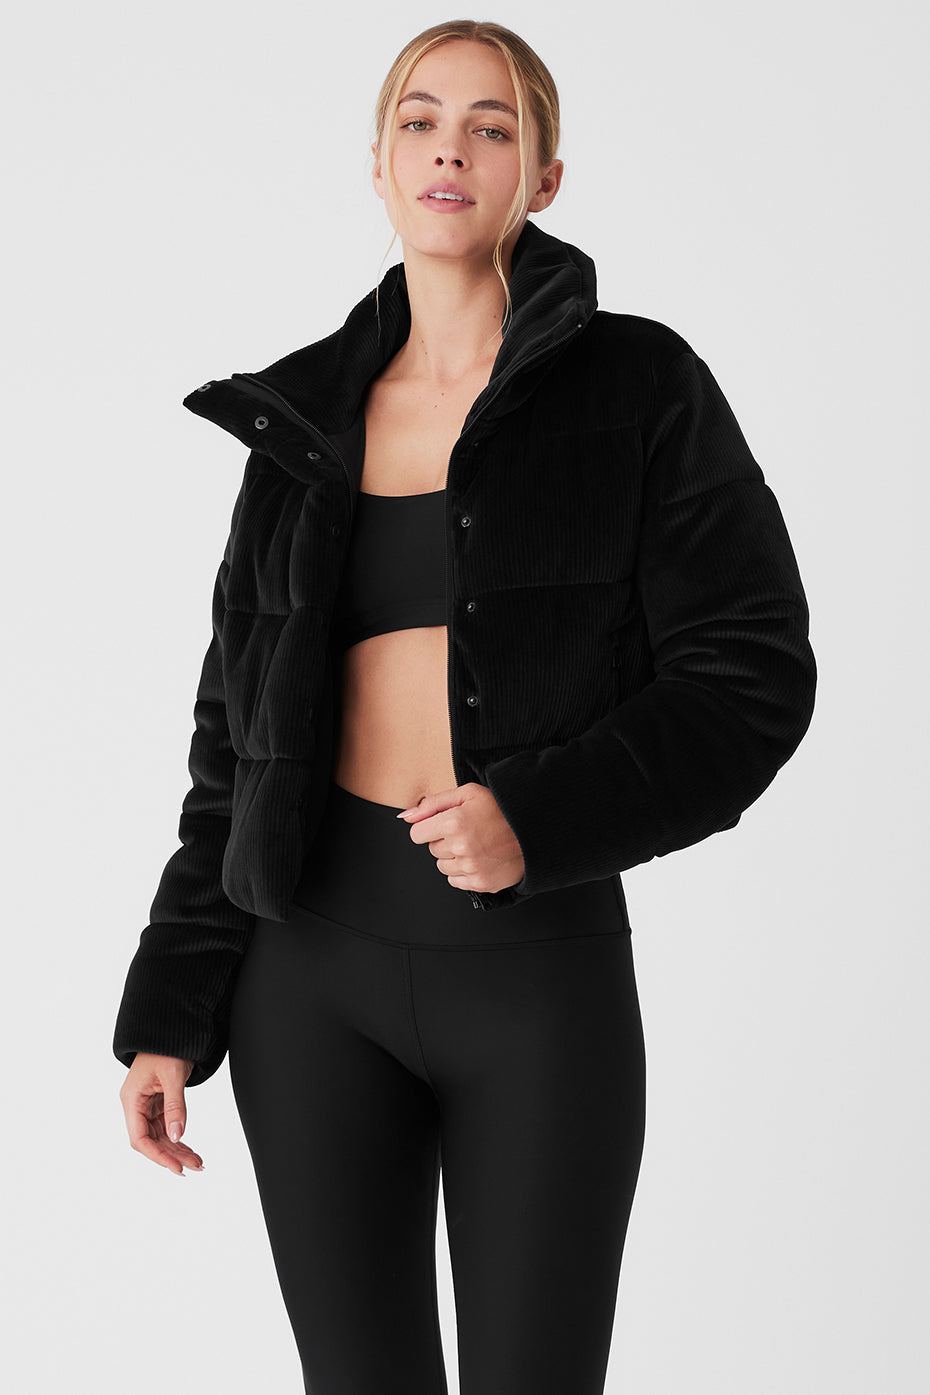 Forever 21 Thrills Patch Velour Puffer Jacket